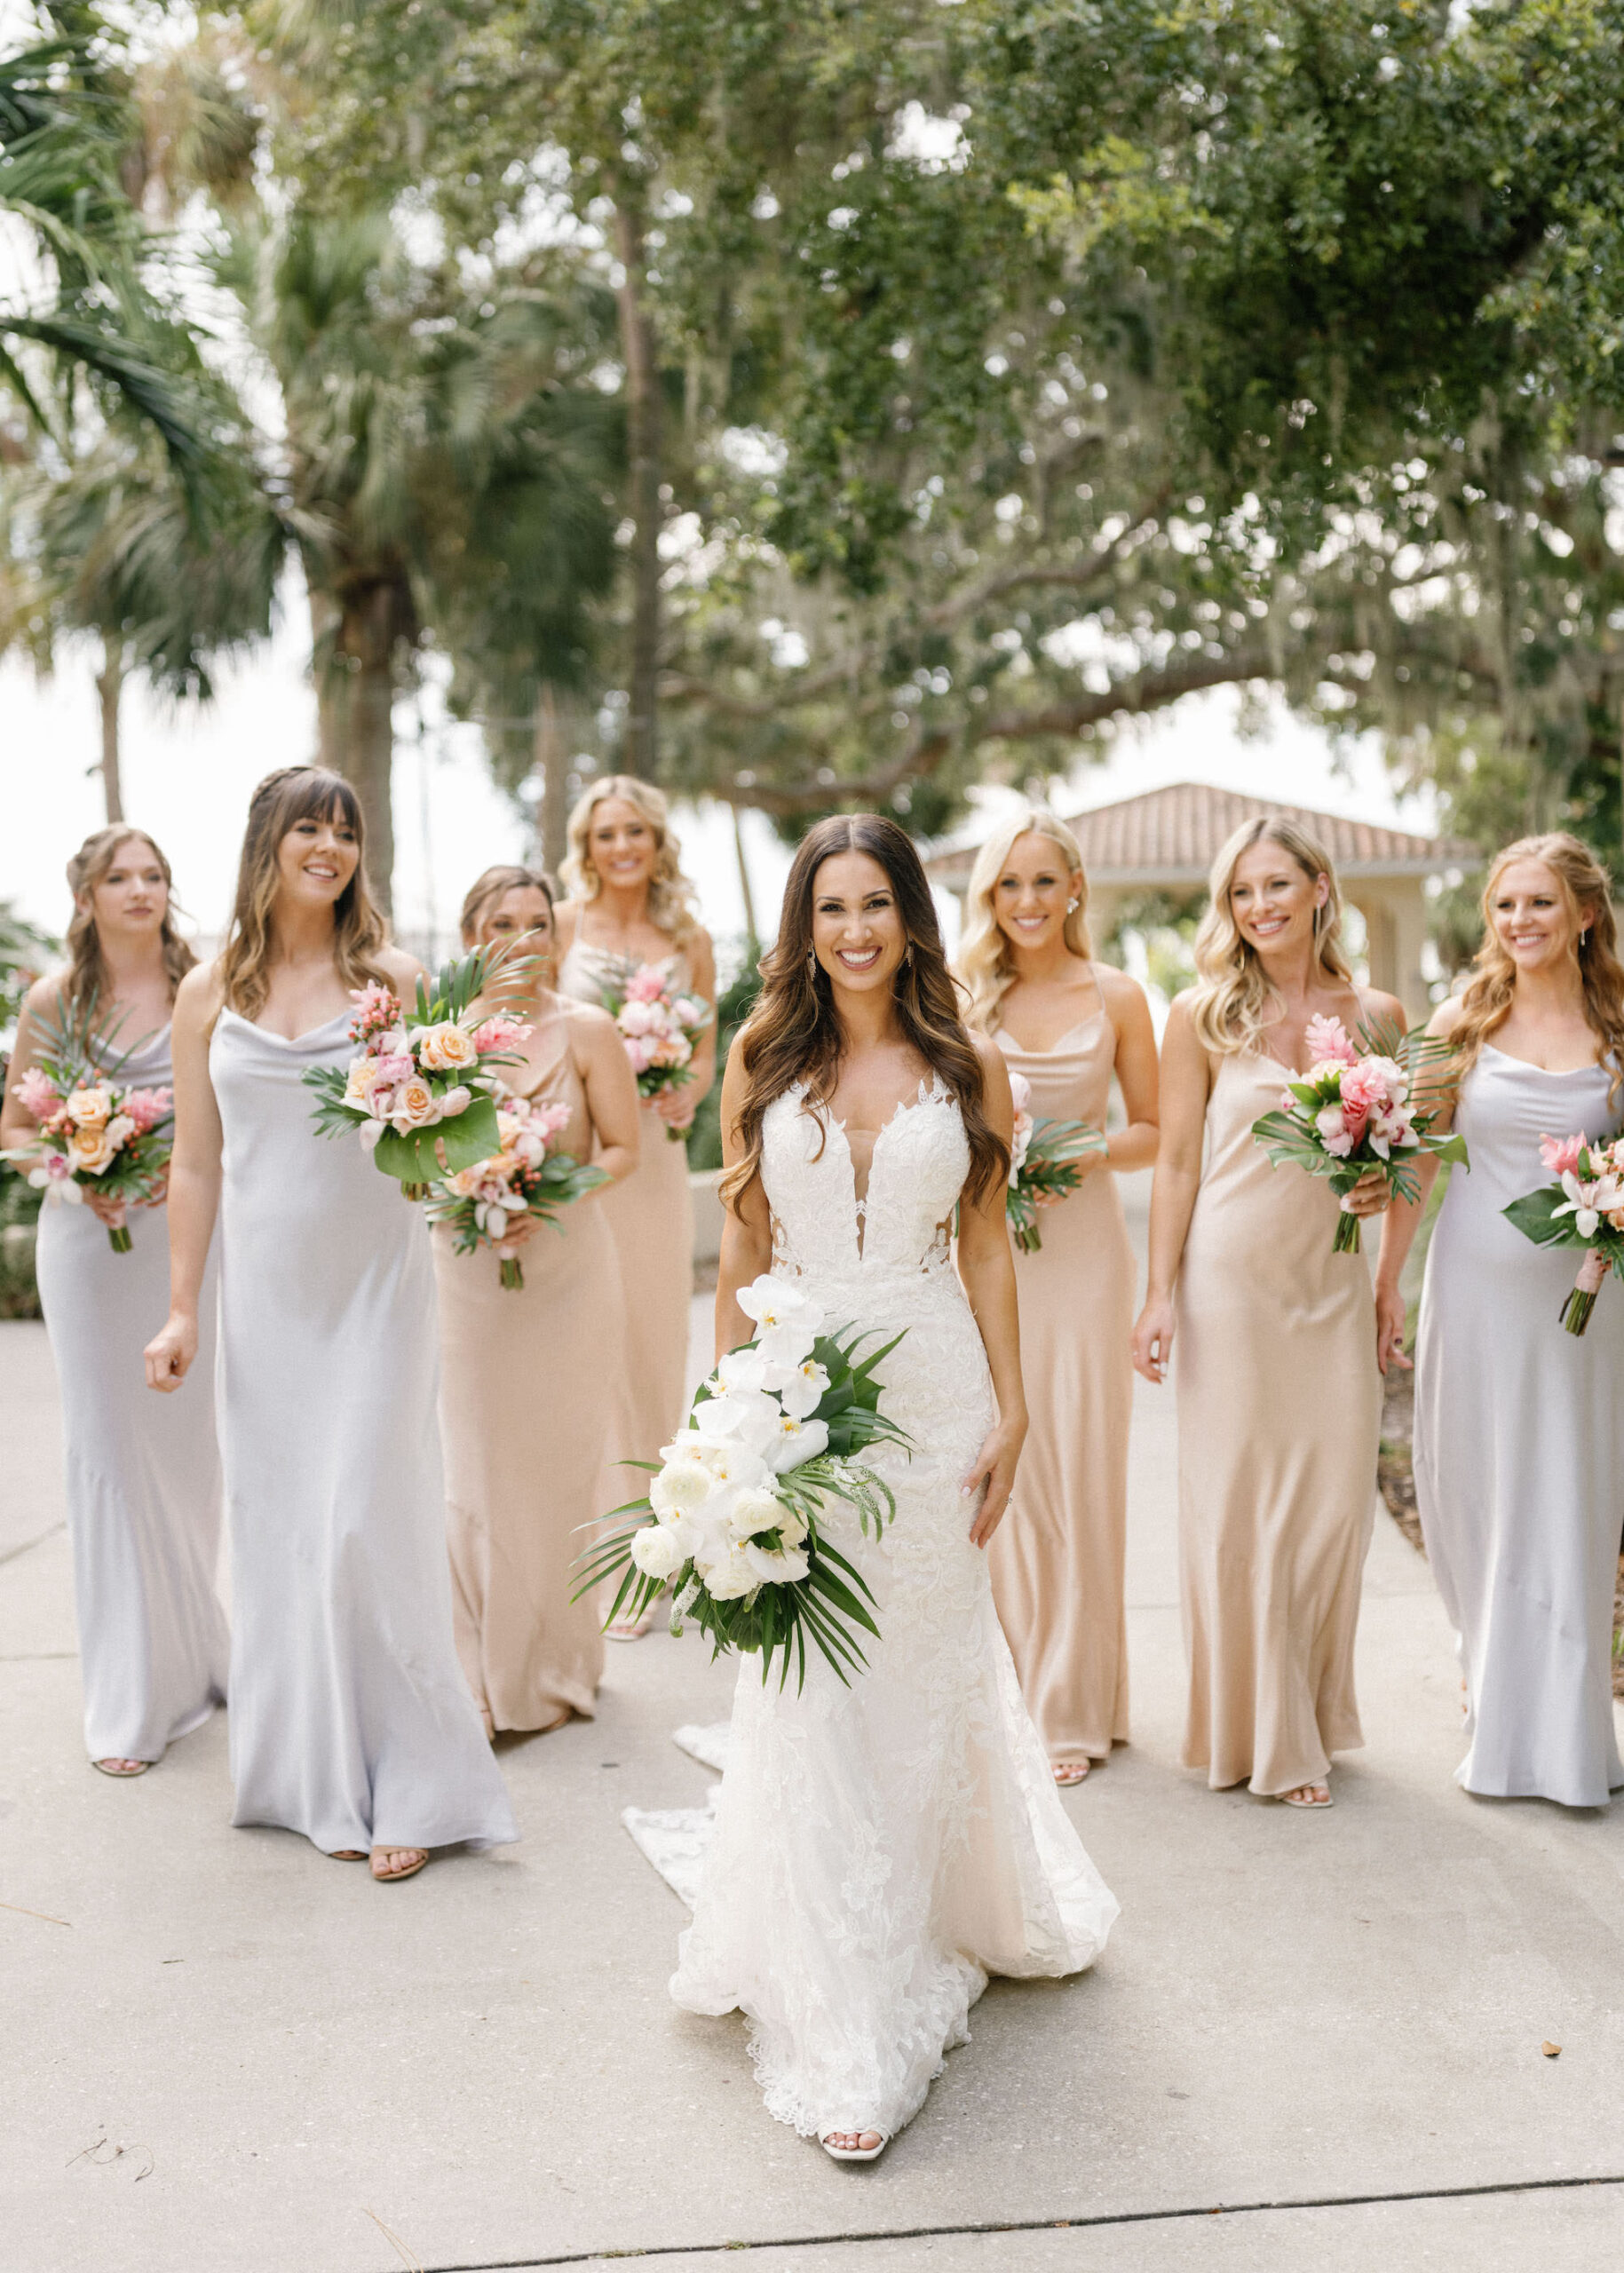 Luxurious Classic Wedding, Bridesmaids Wearing Matching Champagne and Silver Silk Dresses Holding Tropical Floral Bouquets | Tampa Wedding Florist Botanica International Design Studio